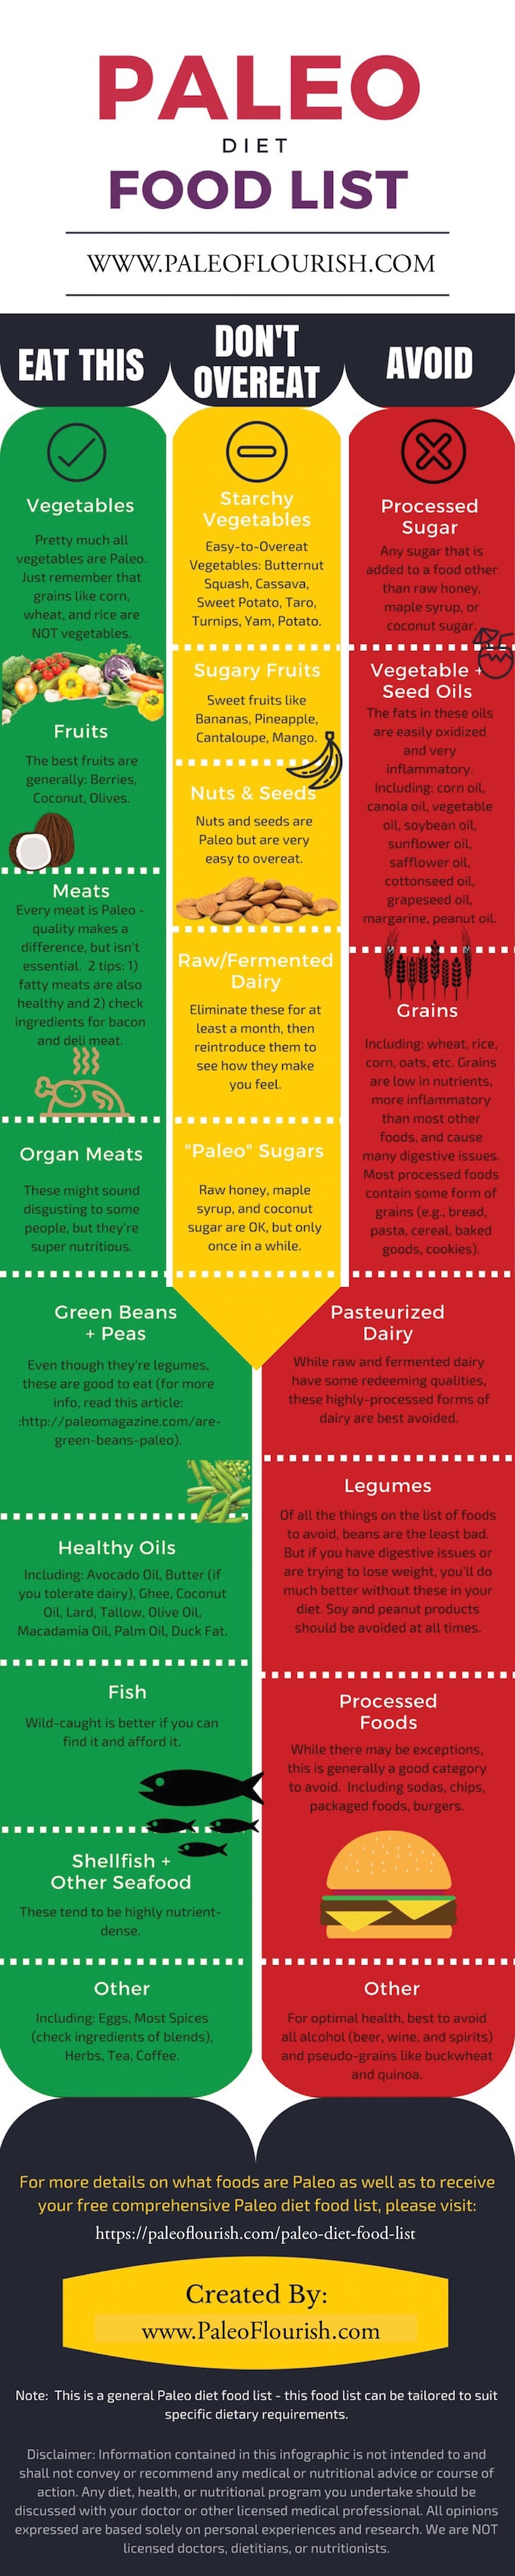 Paleo Diet Food List Infographic Image - visit https://paleoflourish.com/paleo-diet-food-list to get this complete Paleo Diet Food List - including a downloadable PDF to reference wherever you go